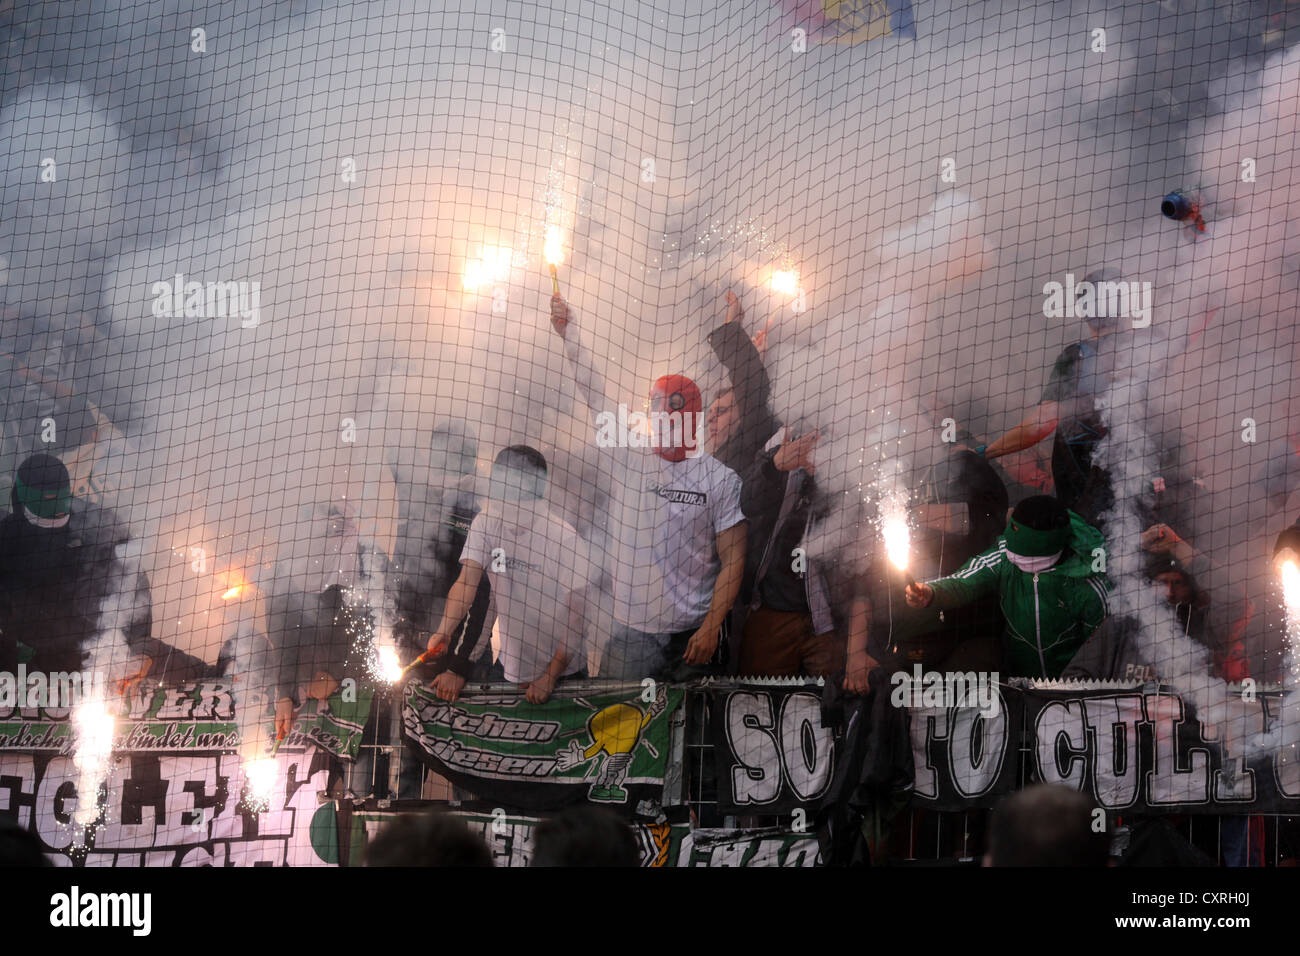 Fans of Borussia Moenchengladbach have ignited fireworks and flares during the match FSV Mainz 05 vs Borussia Moenchengladbach Stock Photo